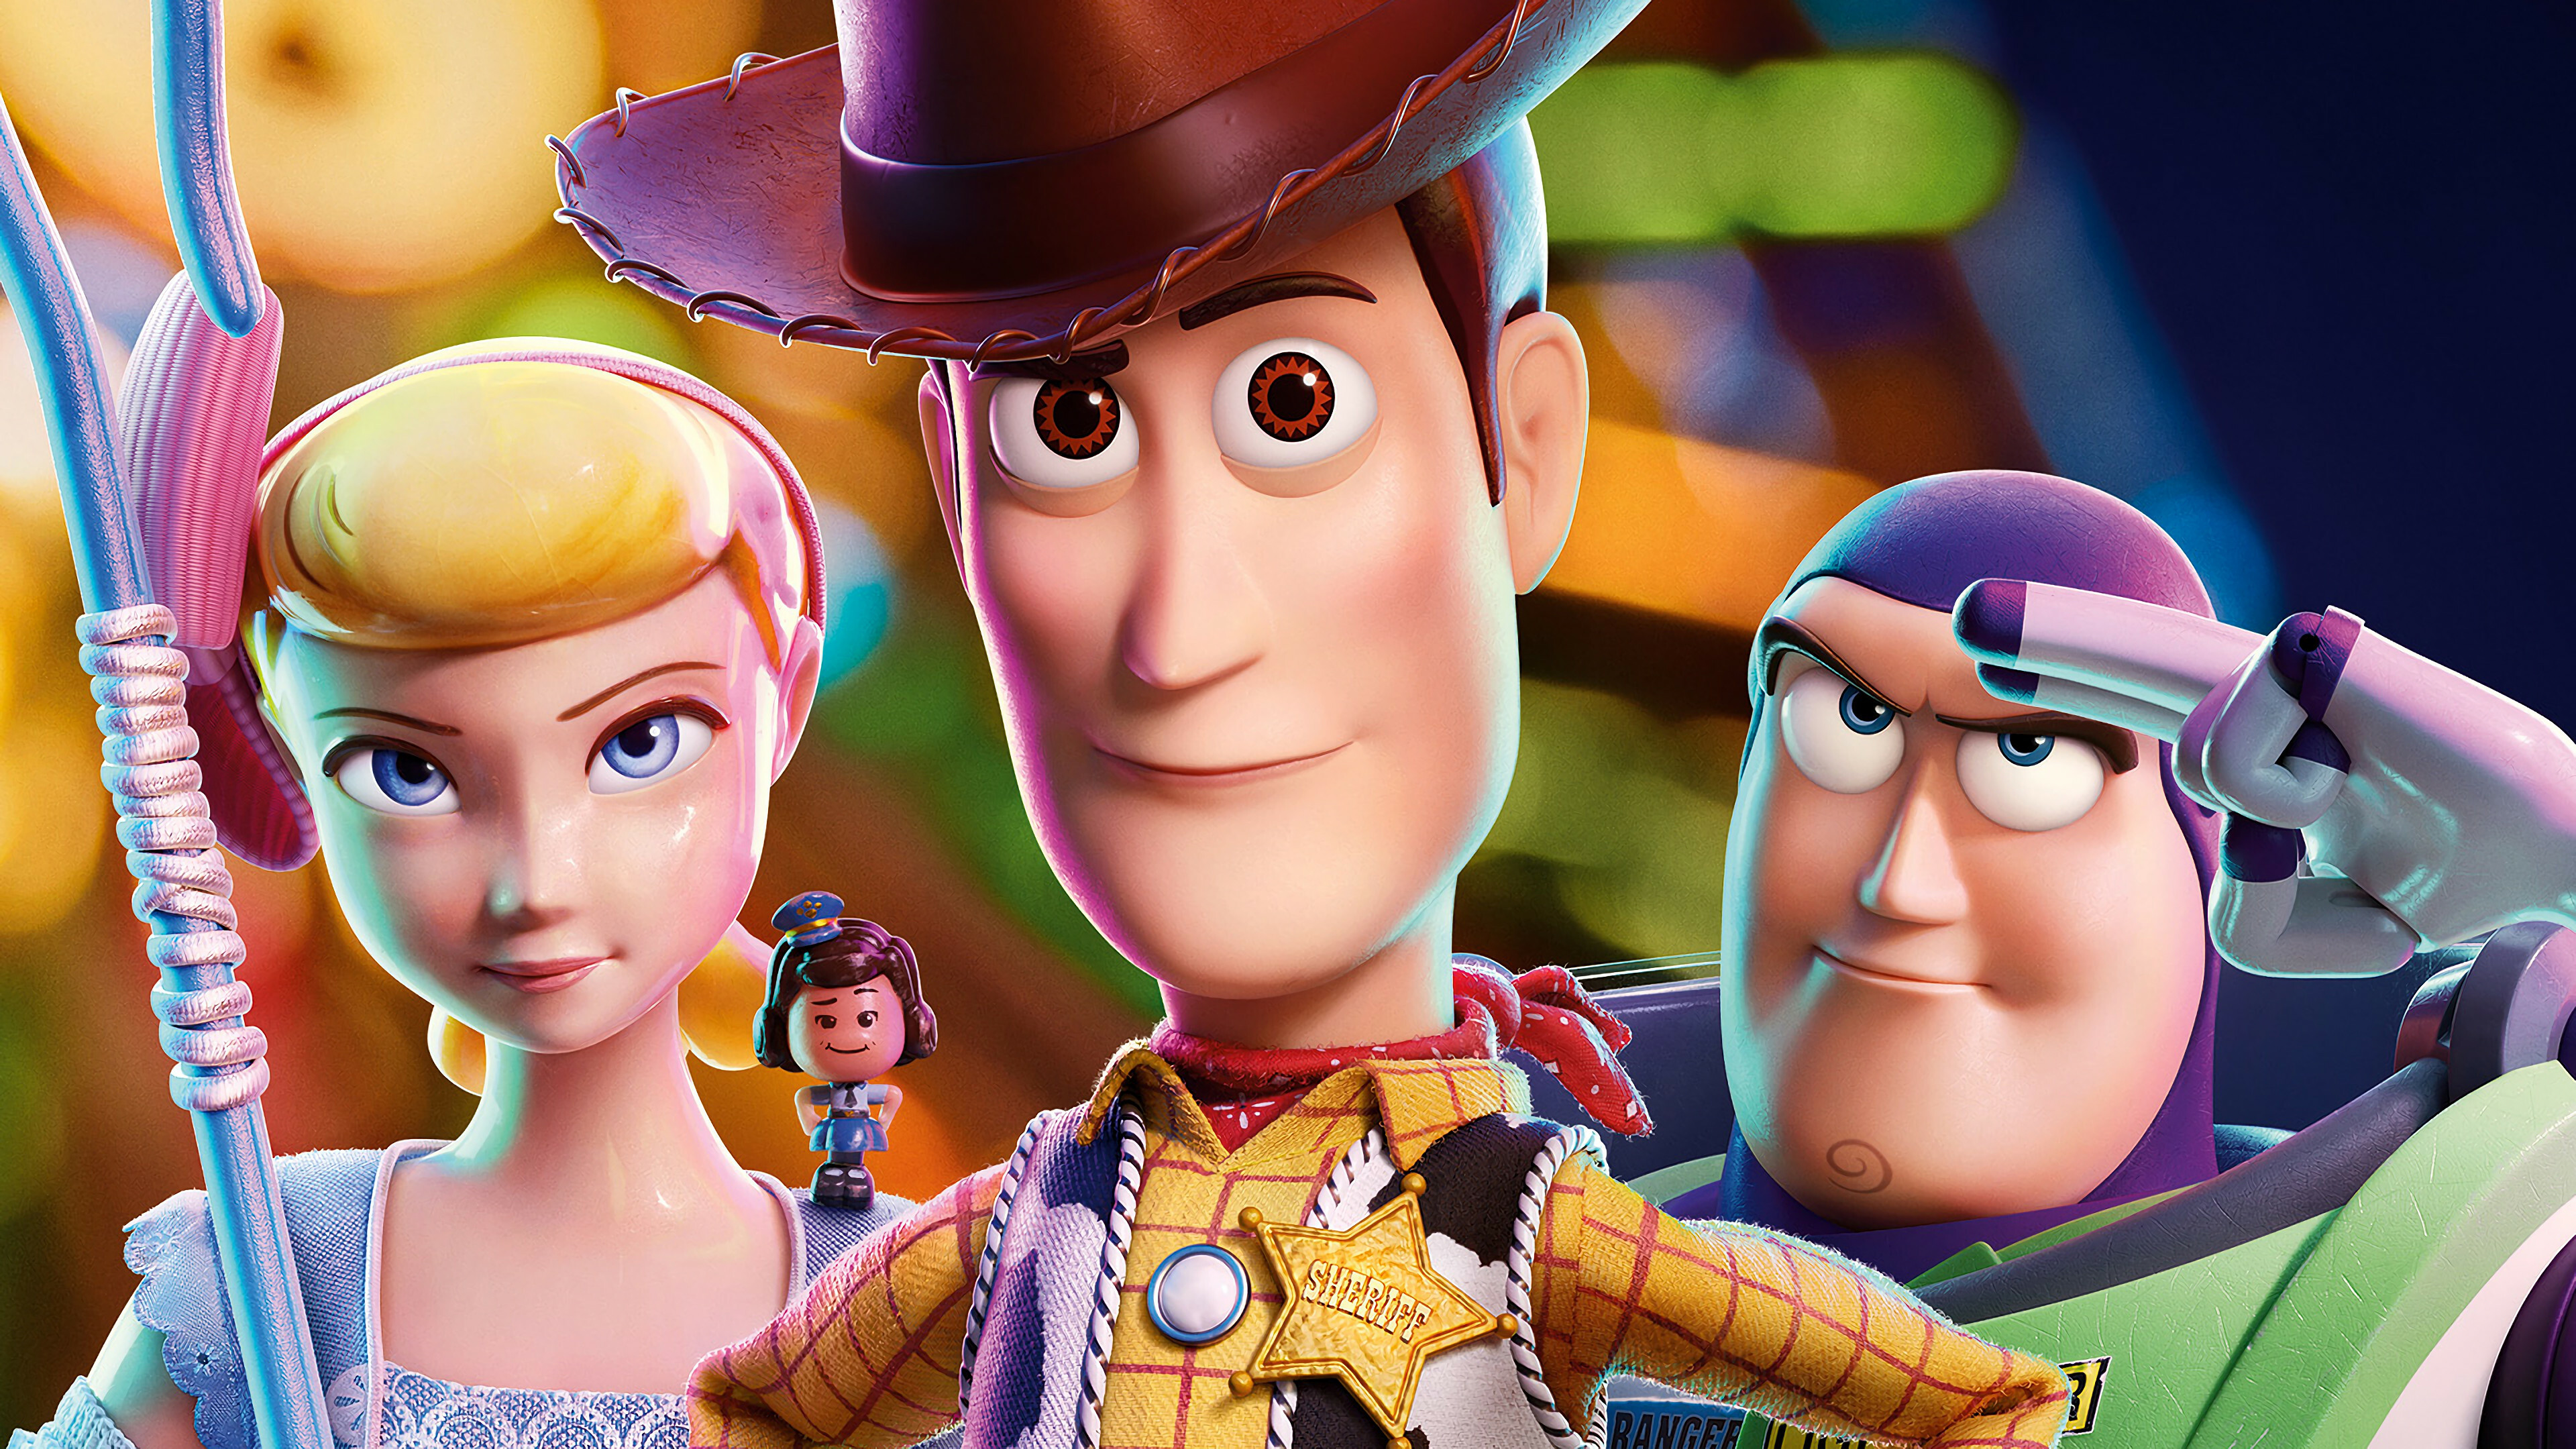 Toy Story: Woody, Buzz Lightyear, Bo Peep, Directed by Josh Cooley. 3840x2160 4K Wallpaper.